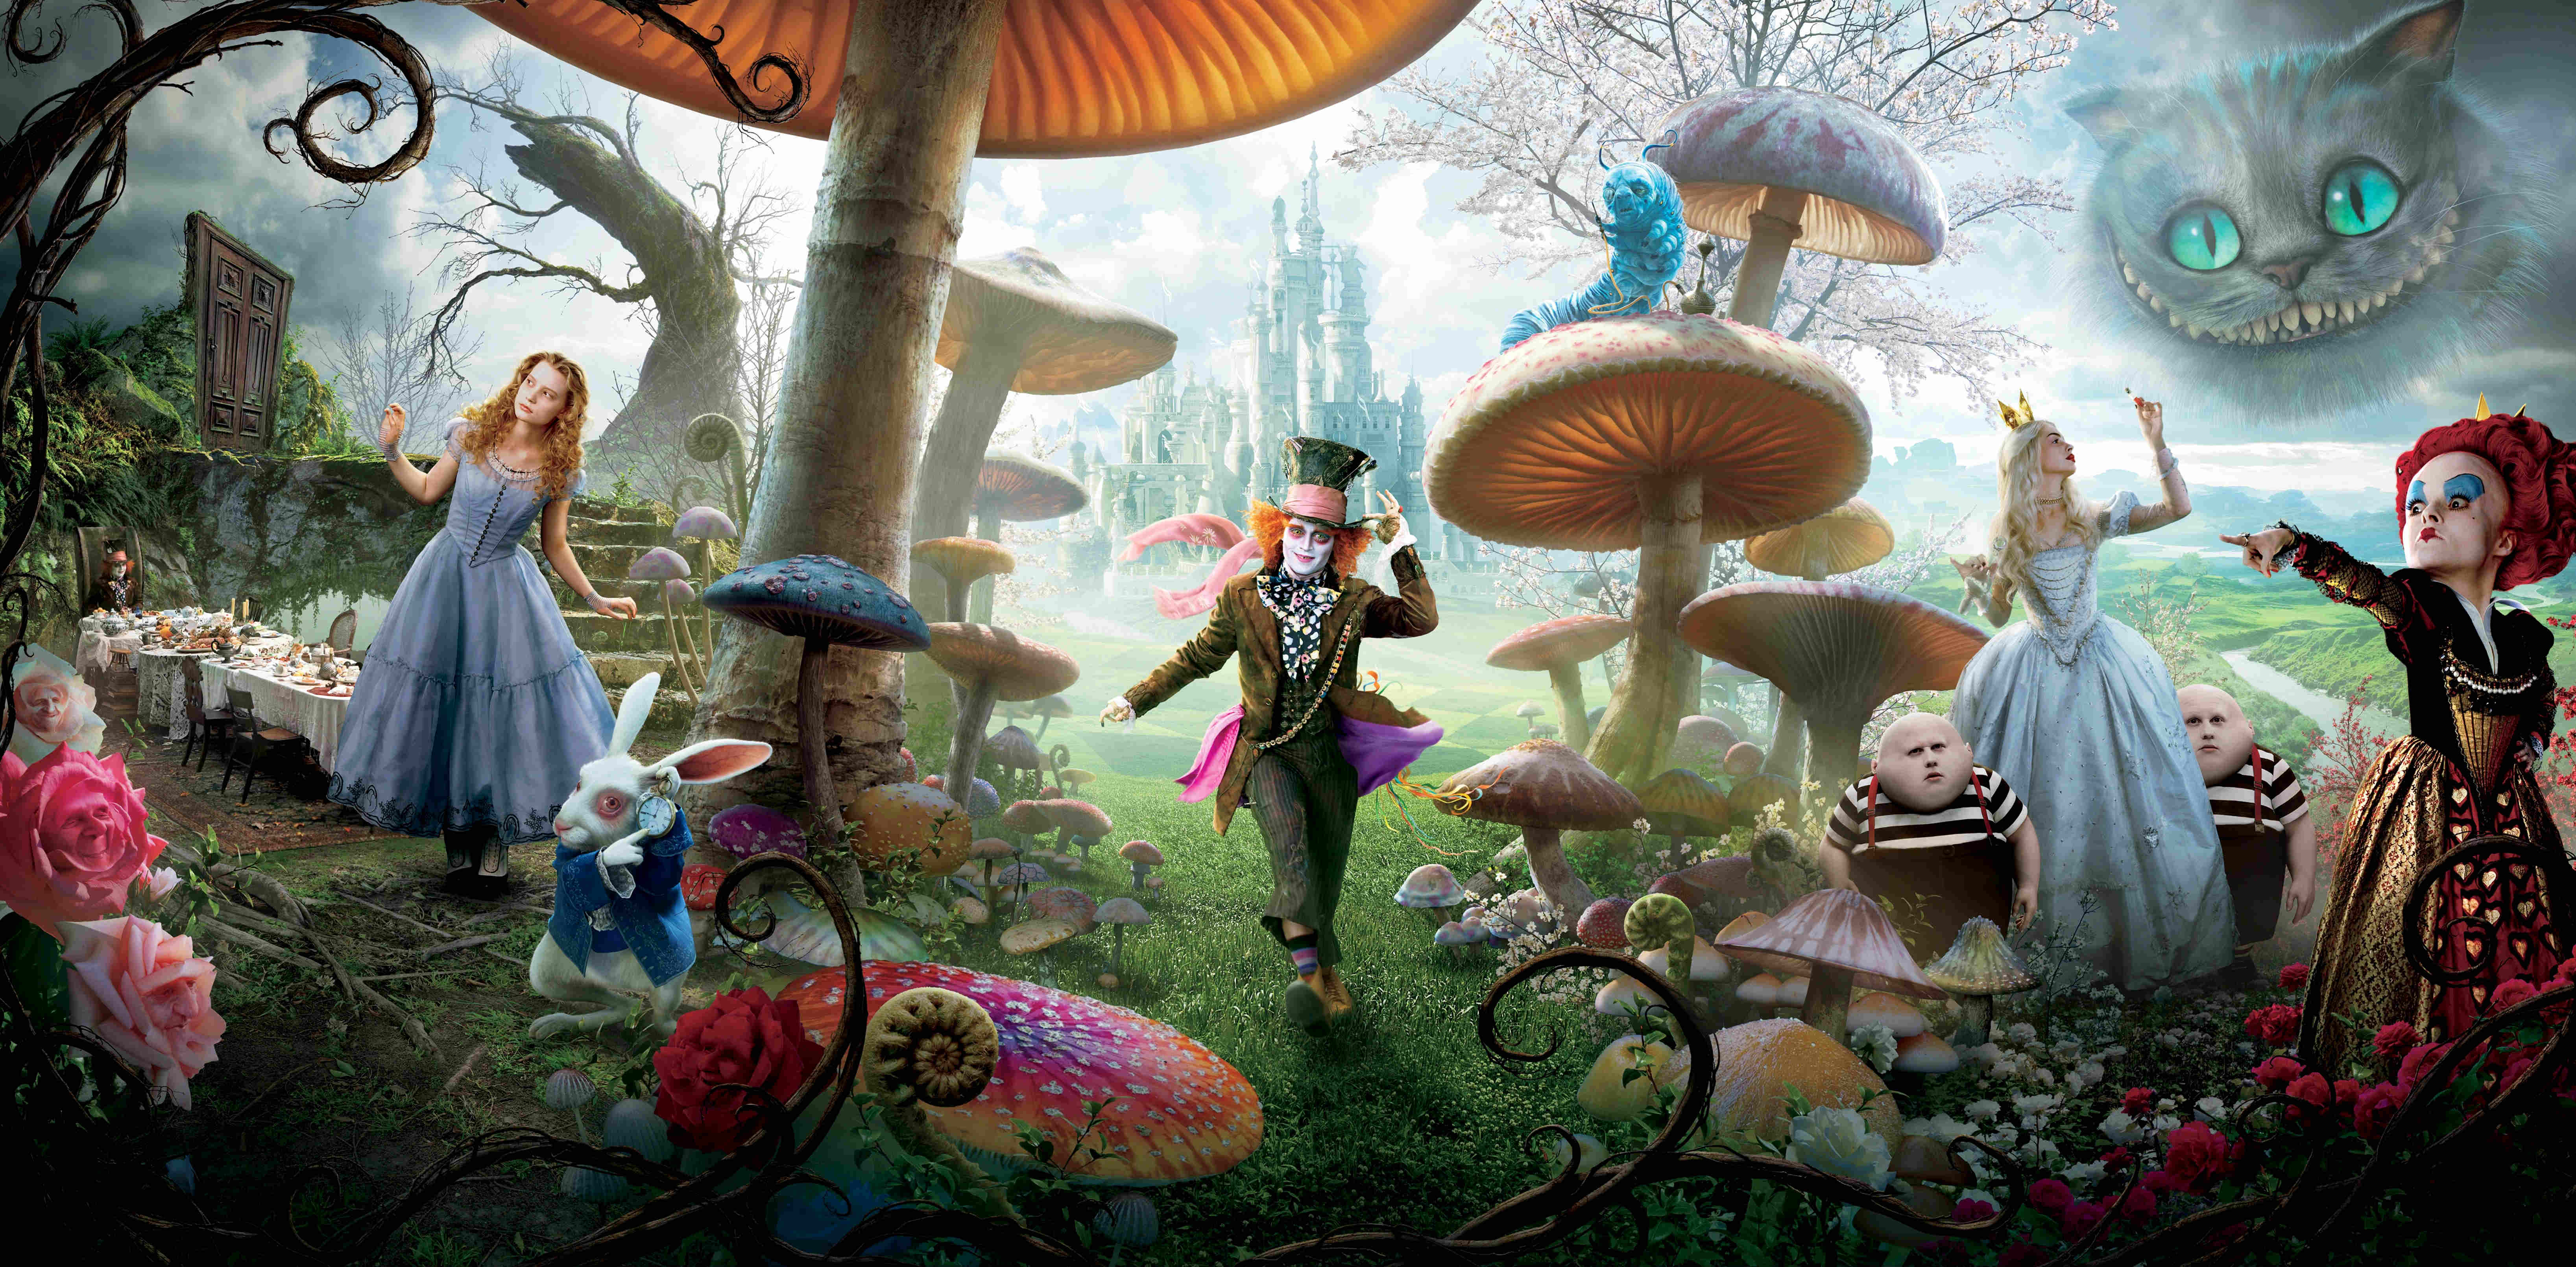 A new director in the cards for the ‘alice in wonderland’ sequel